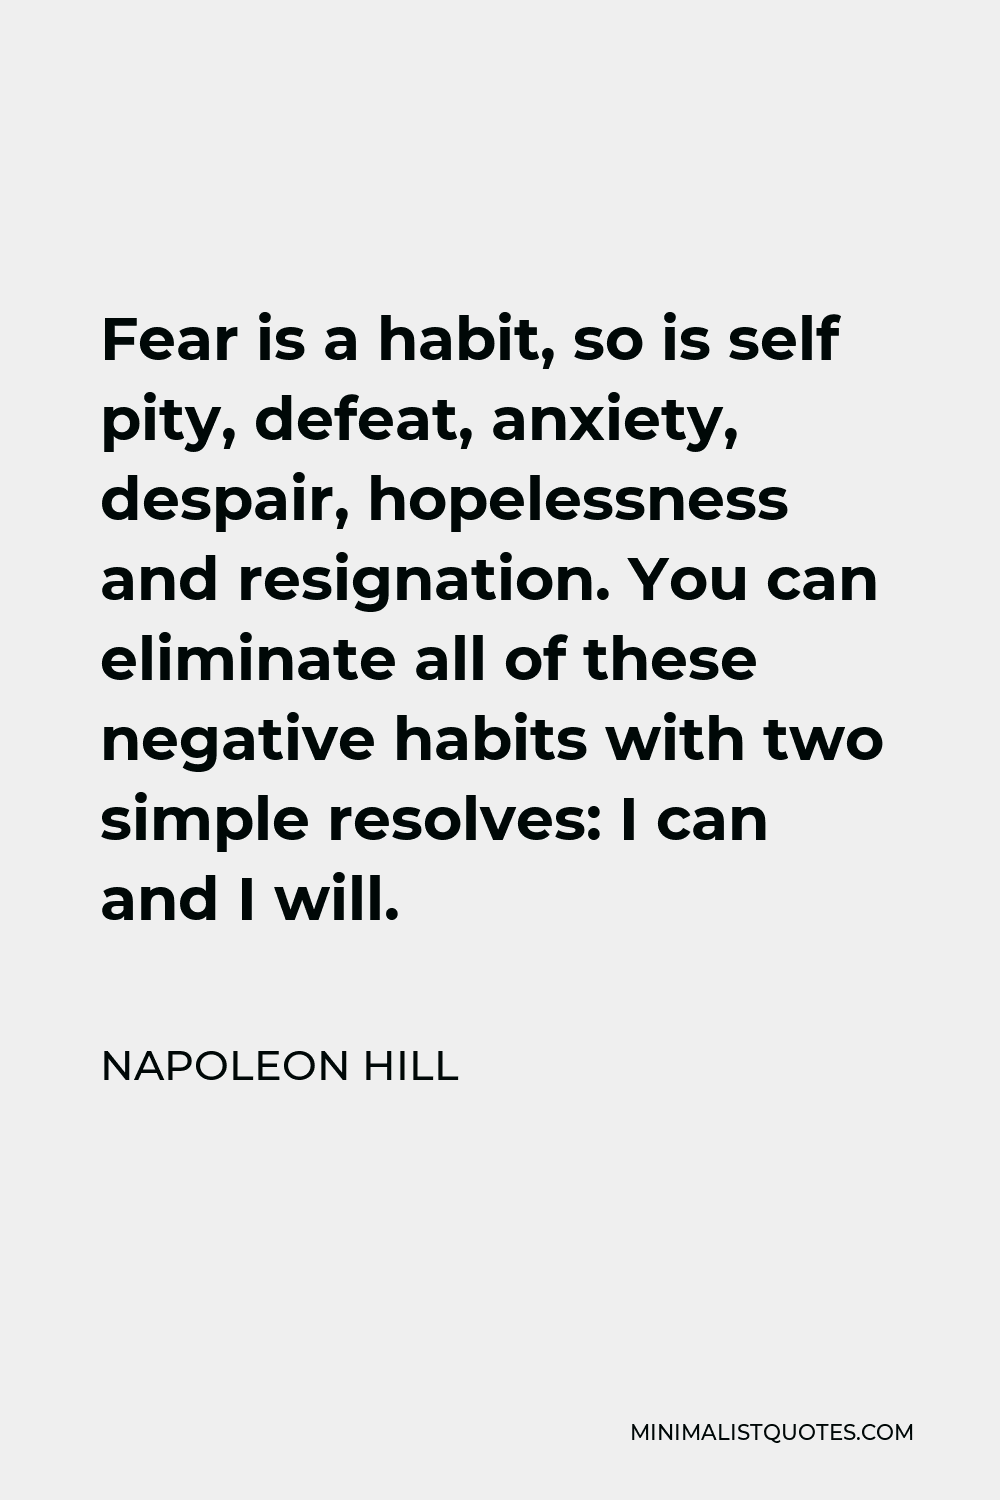 Napoleon Hill Quote - Fear is a habit, so is self pity, defeat, anxiety, despair, hopelessness and resignation. You can eliminate all of these negative habits with two simple resolves: I can and I will.